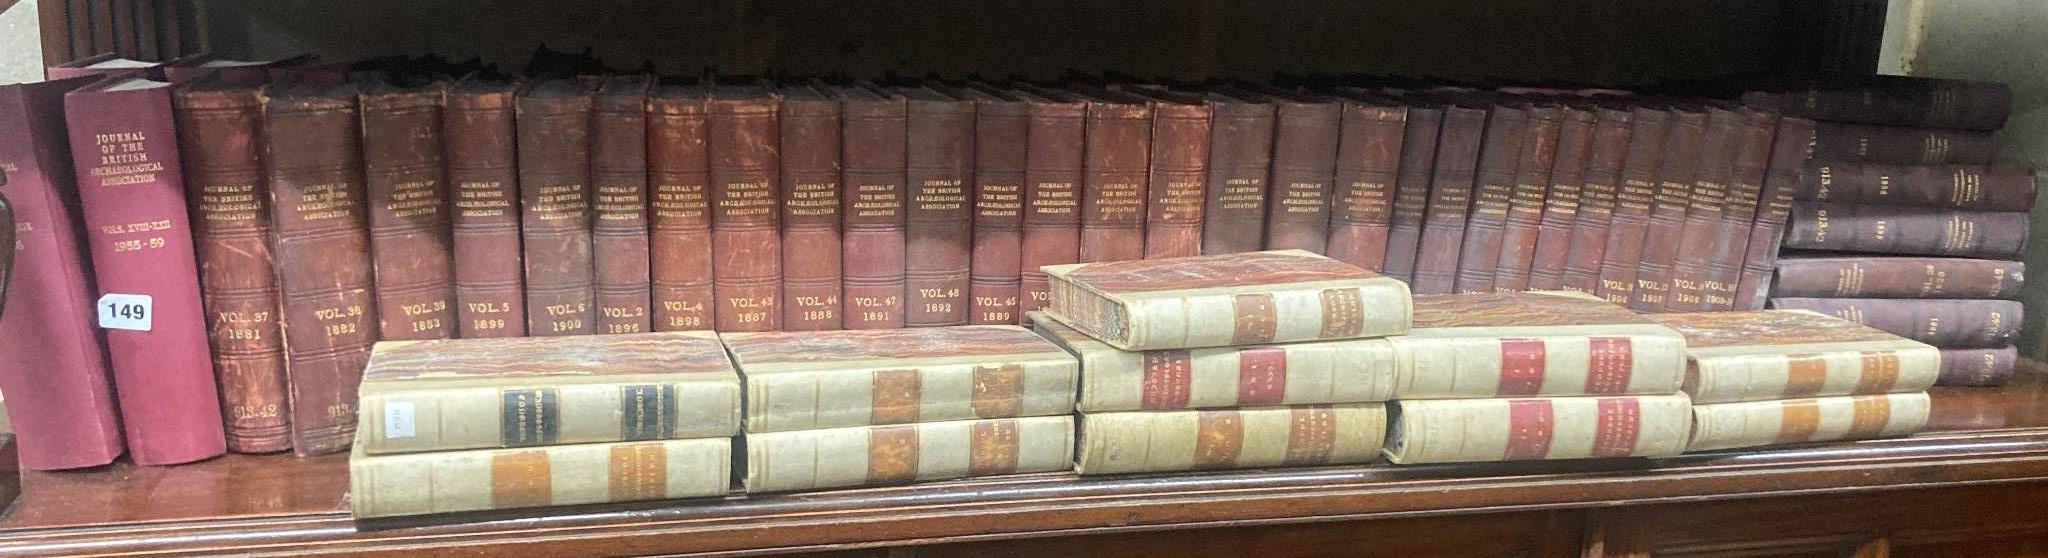 Journal of the British Archaeological Association, mid 19th to early 20th century, approx. 80 volumes